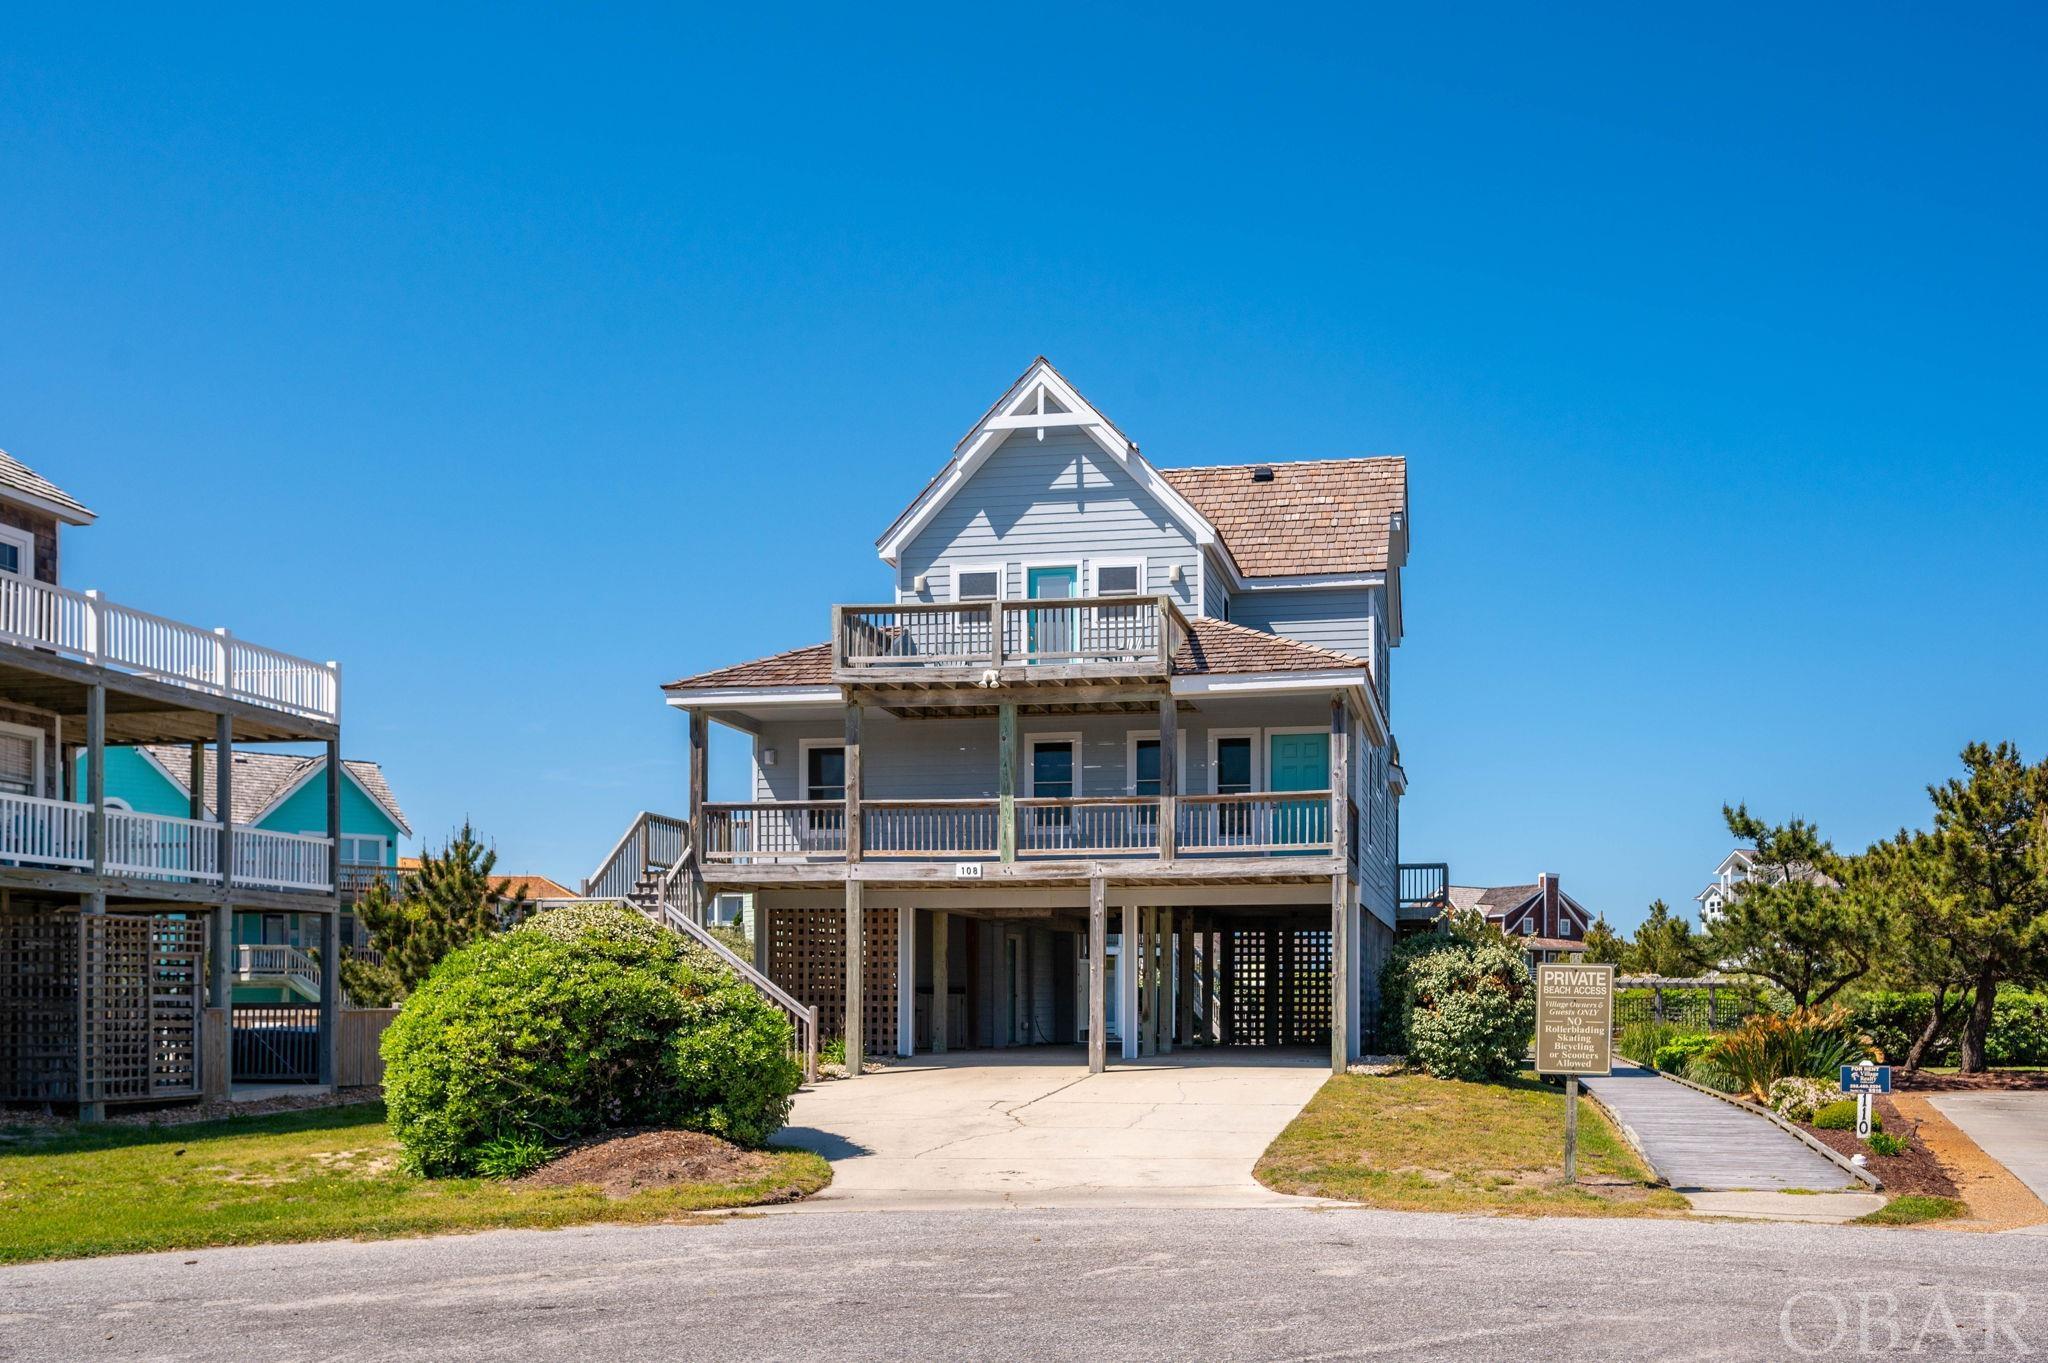 A fantastic opportunity to own a smaller home on the east side of the Beach Road and in one of the premiere communities on the Outer Banks- Village at Nags Head. This 4-BR, semi-oceanfront has a multitude of major updates including a new roof (2023), new LP Smart siding and windows (2021), new decking (2022), and many interior fixtures (2021). And all just a few short steps to the beach. Enjoy the ocean view from your back deck along with the sound of the waves washing ashore. The Village at Nags Head offers separate memberships for the Village Beach Club and Nags Head Golf Links.